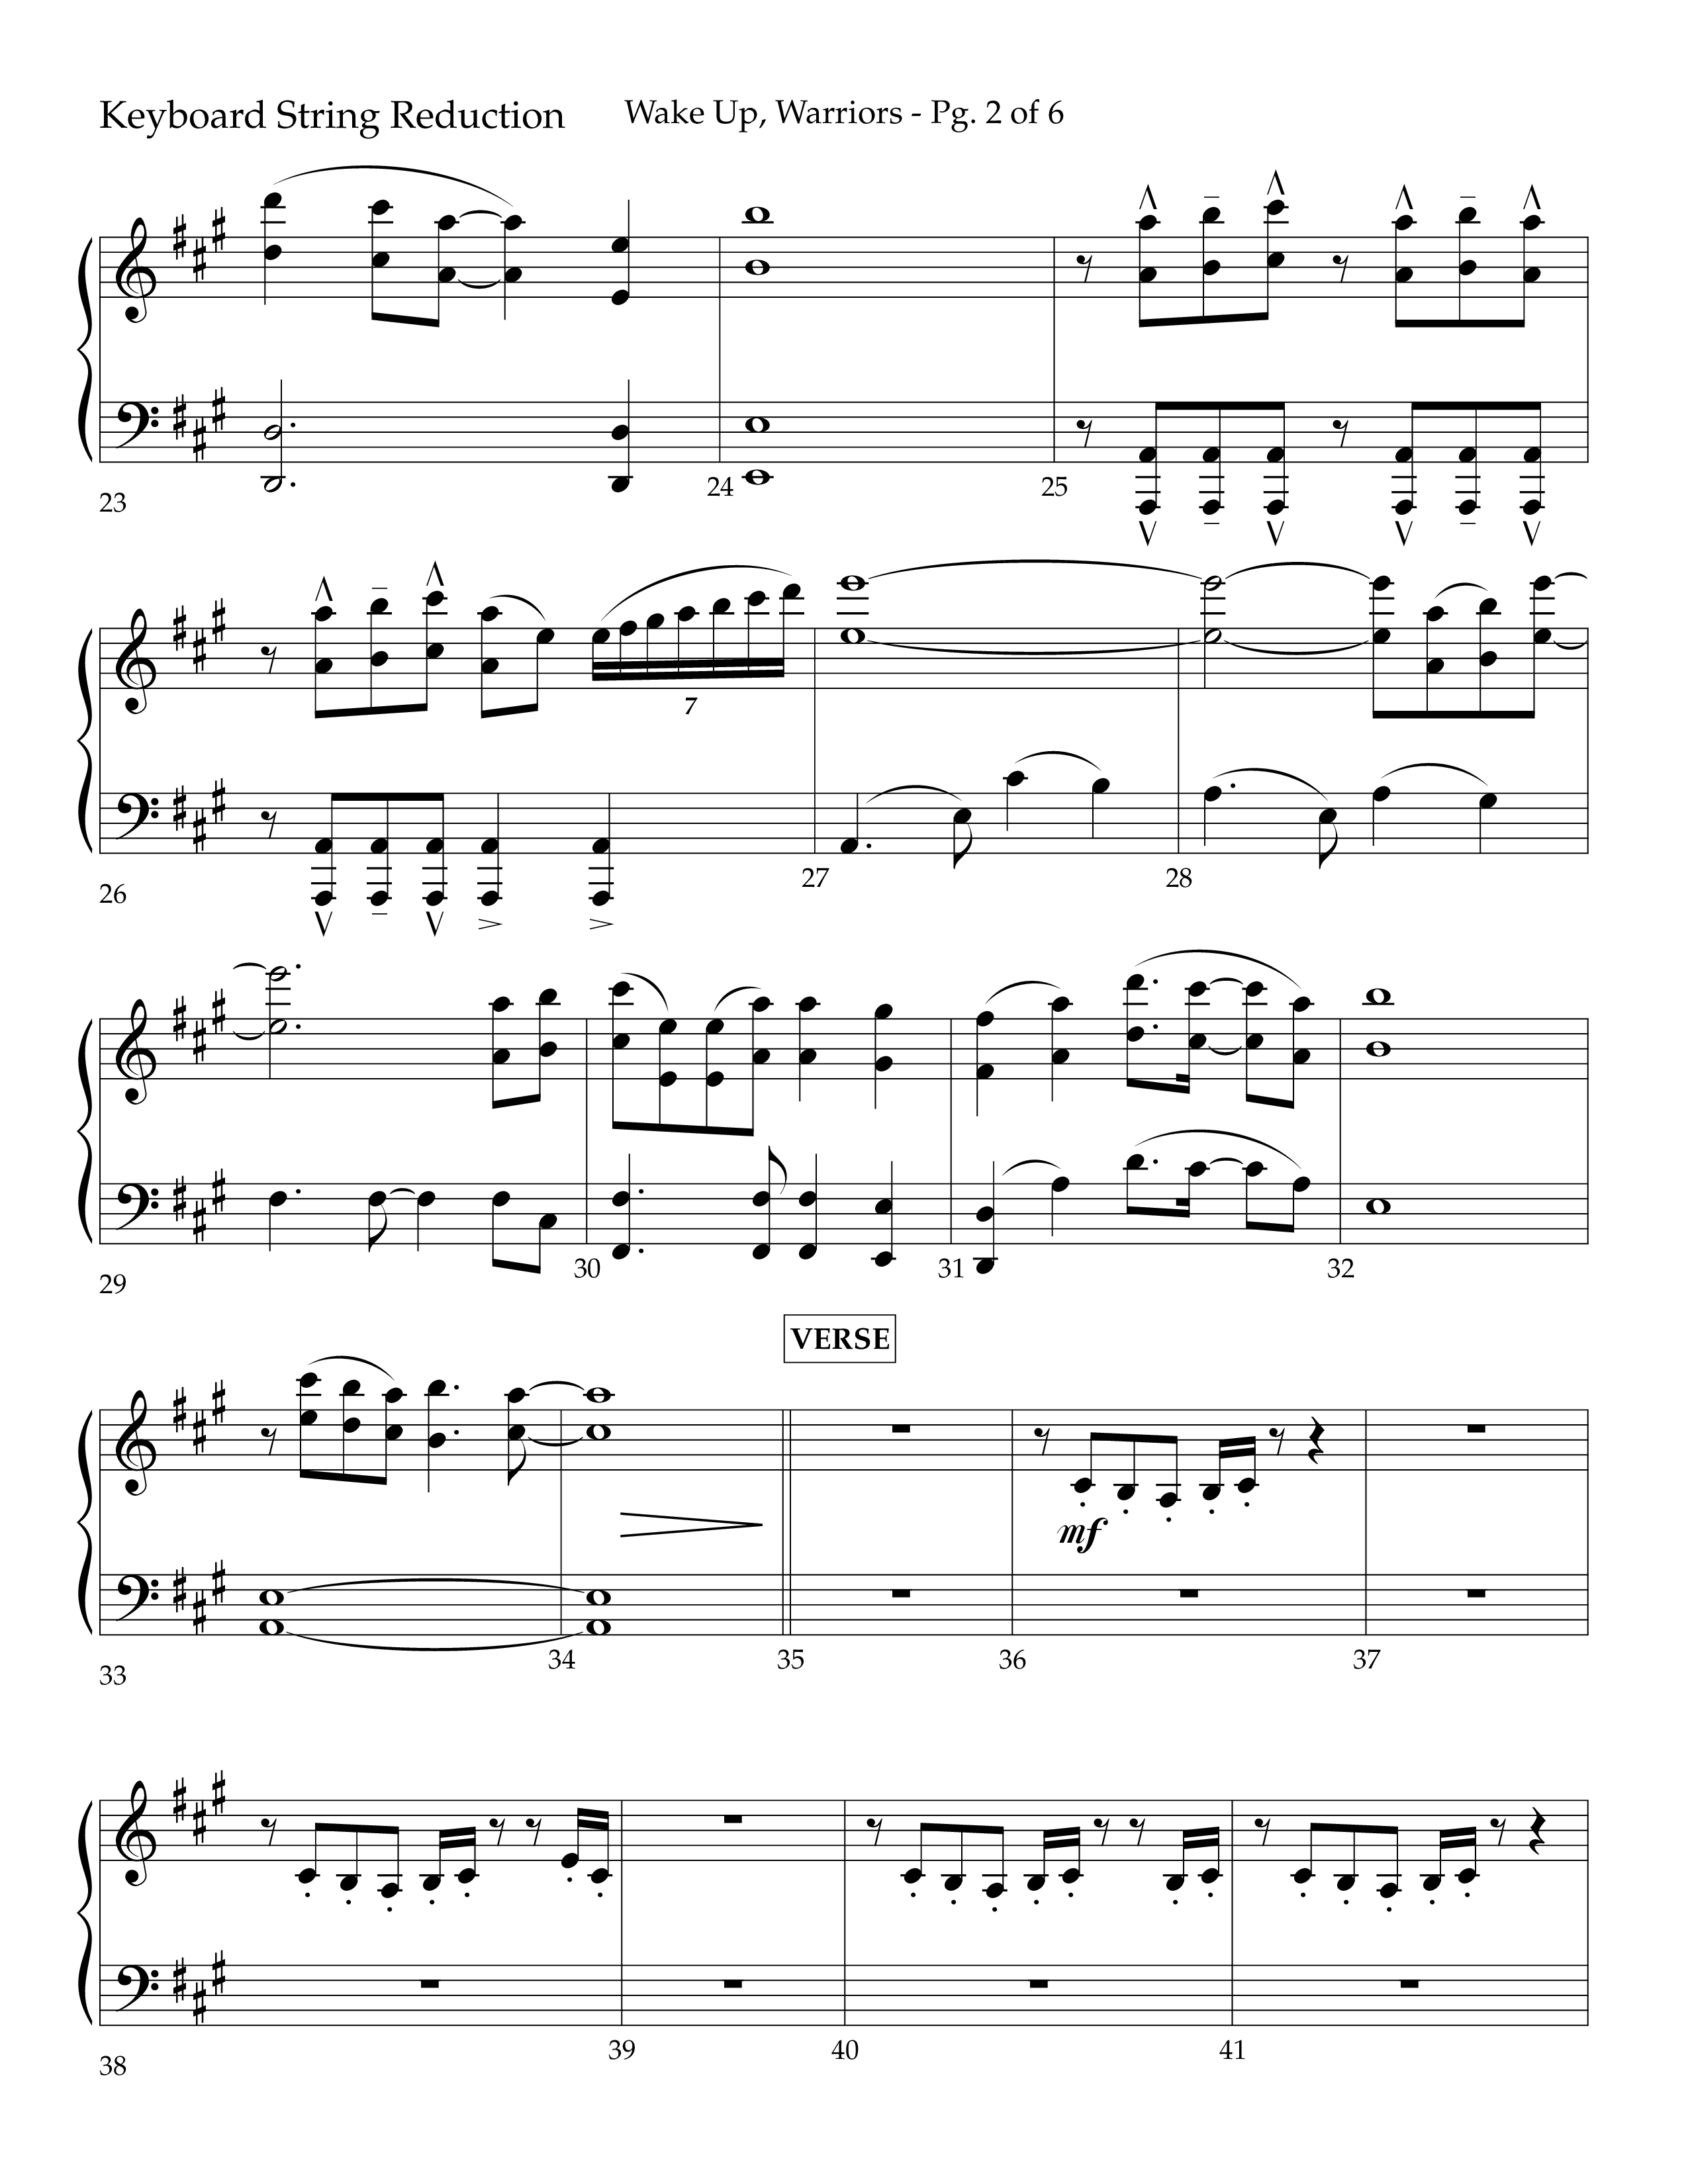 Wake Up Warriors (Choral Anthem SATB) String Reduction (Lifeway Choral / Arr. John Bolin / Orch. Tim Cates)